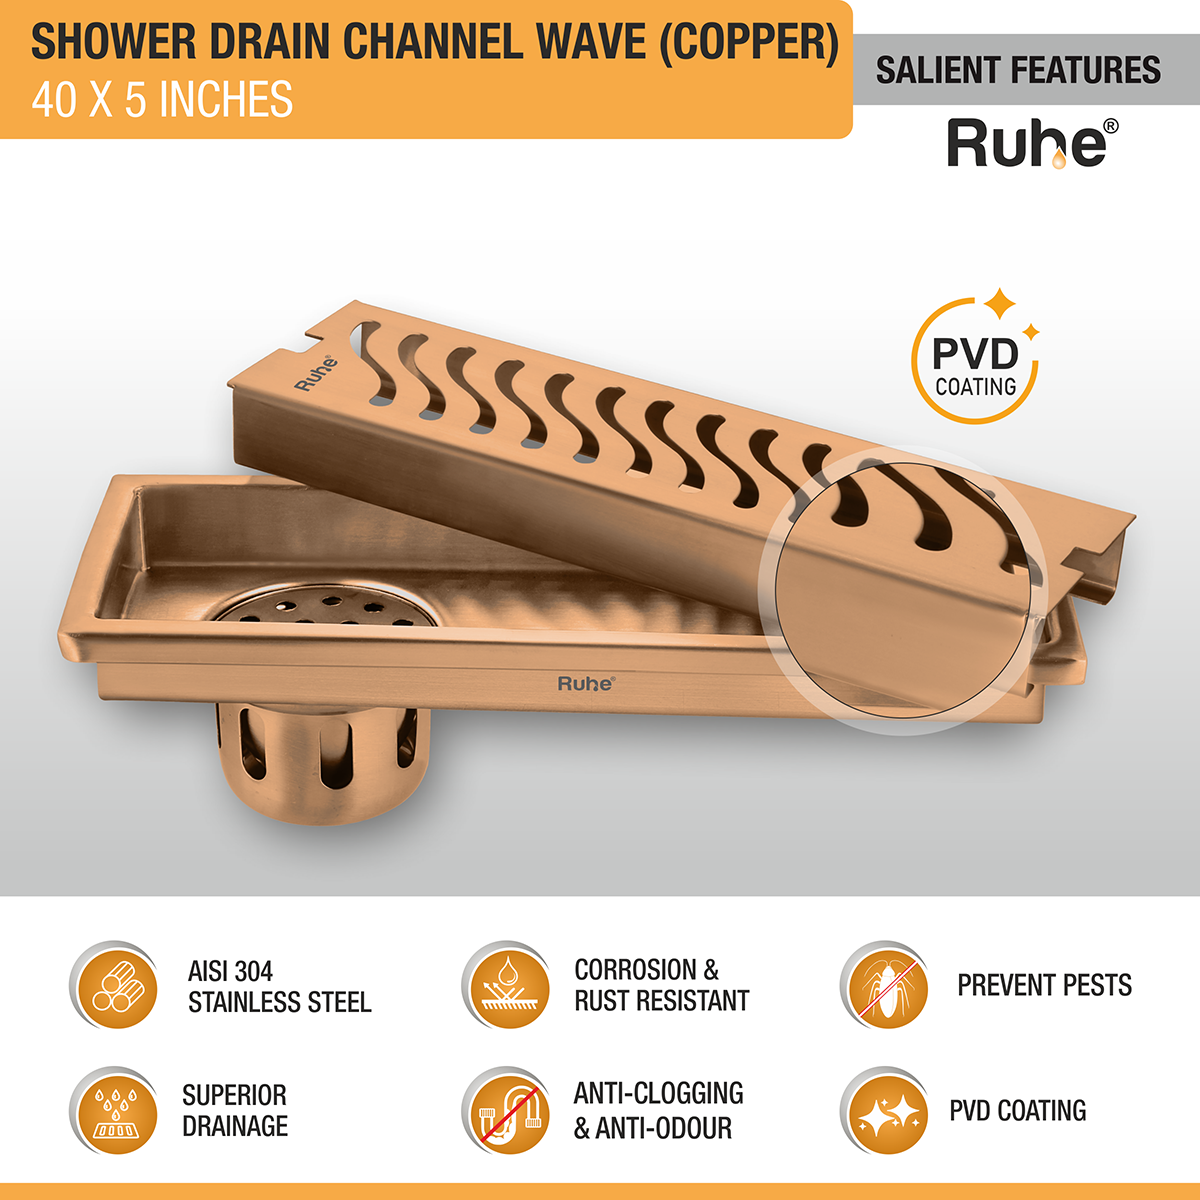 Wave Shower Drain Channel (40 x 5 Inches) ROSE GOLD/ANTIQUE COPPER features